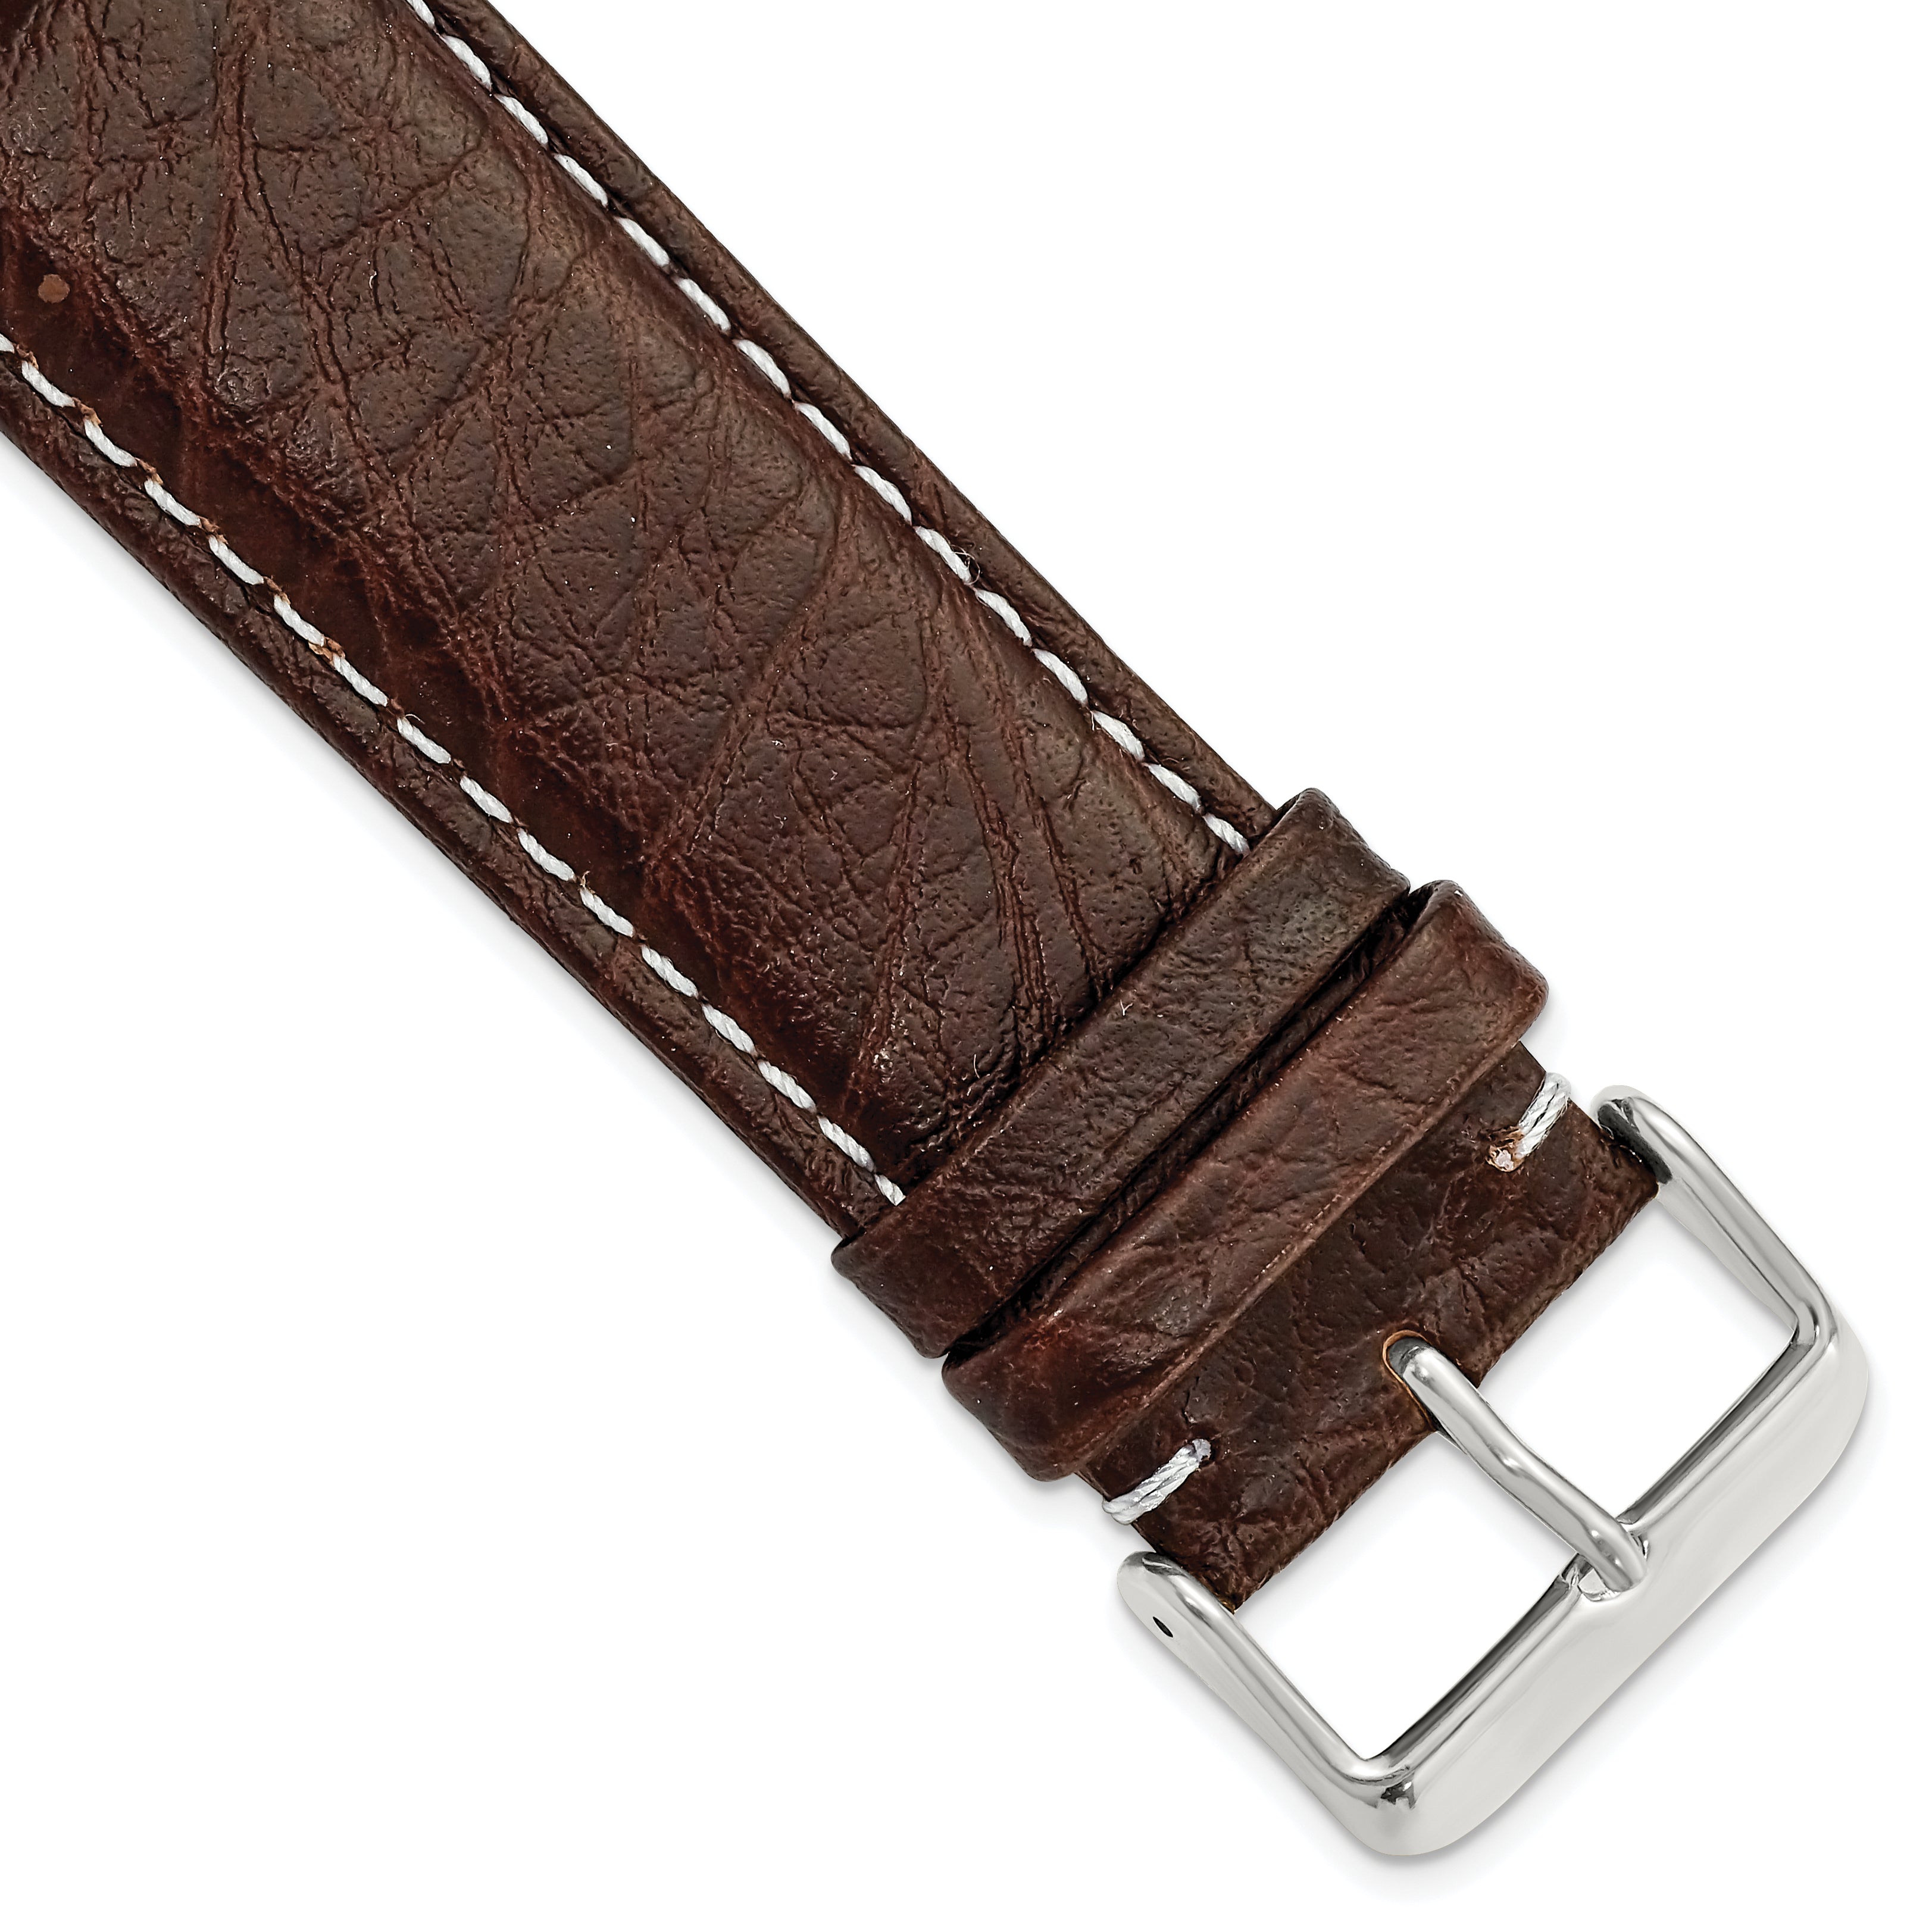 DeBeer 26mm Dark Brown Sport Leather with White Stitching and Silver-tone Buckle 7.5 inch Watch Band